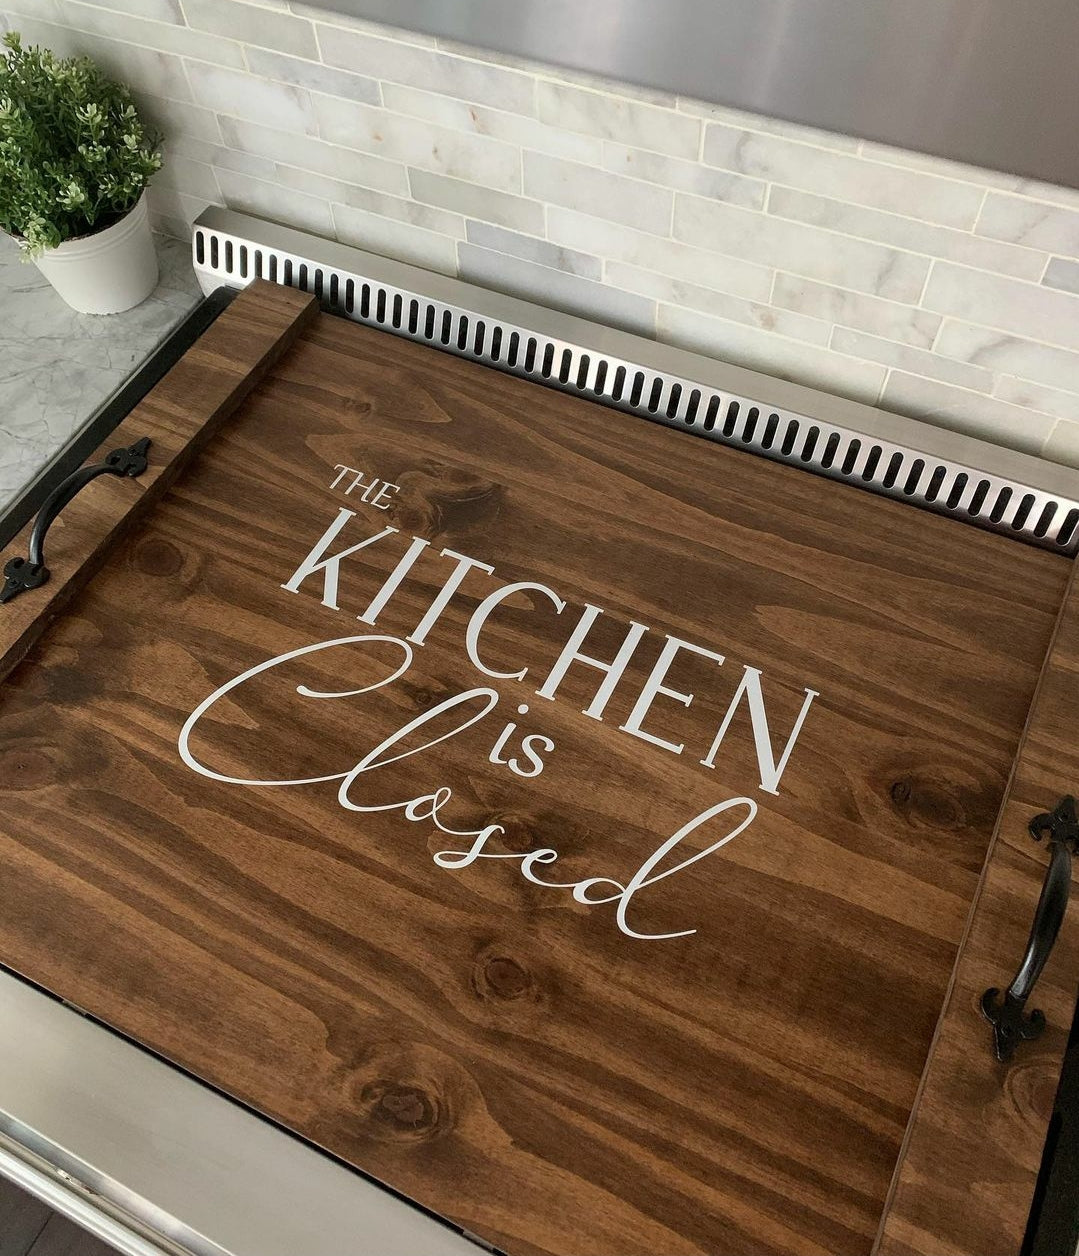 The kitchen is closed - Stove Top Cover - Traditional